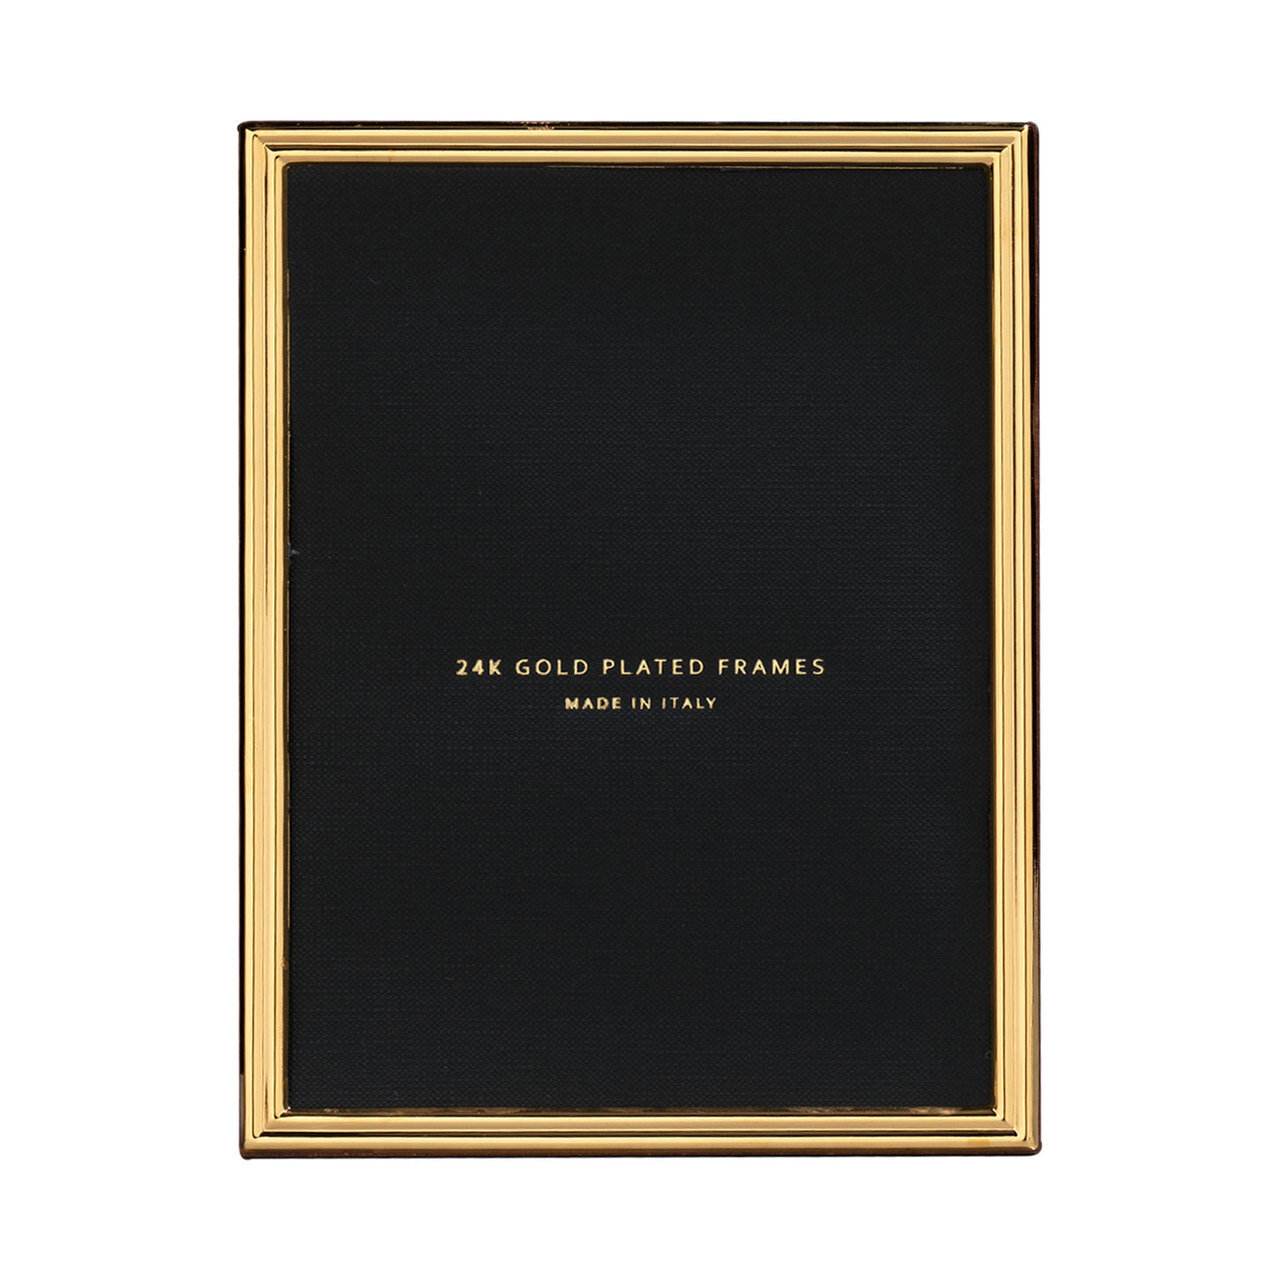 Cunill Plain Narrow 4 x 6 Inch Picture Frame - 24k Gold Plated 0.5 Microns